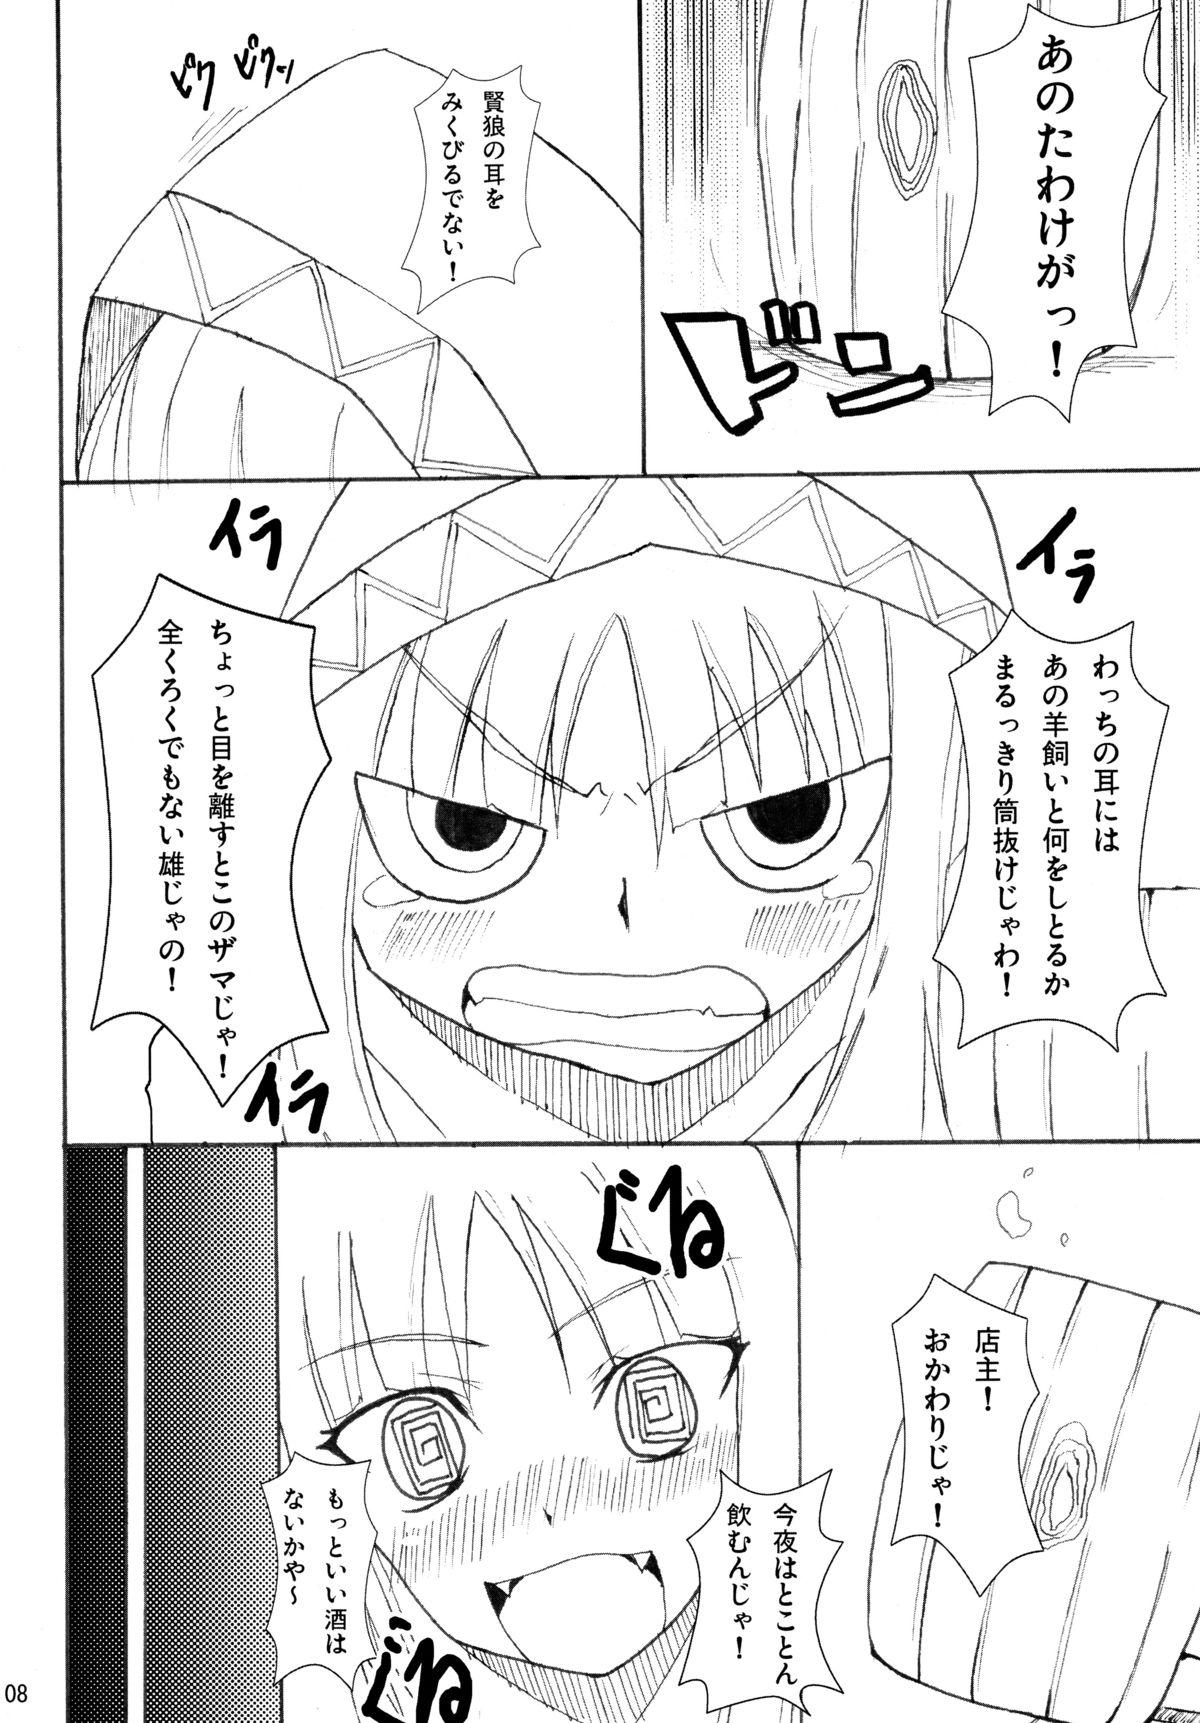 Nudity Naked Spice - Spice and wolf Stepfamily - Page 8